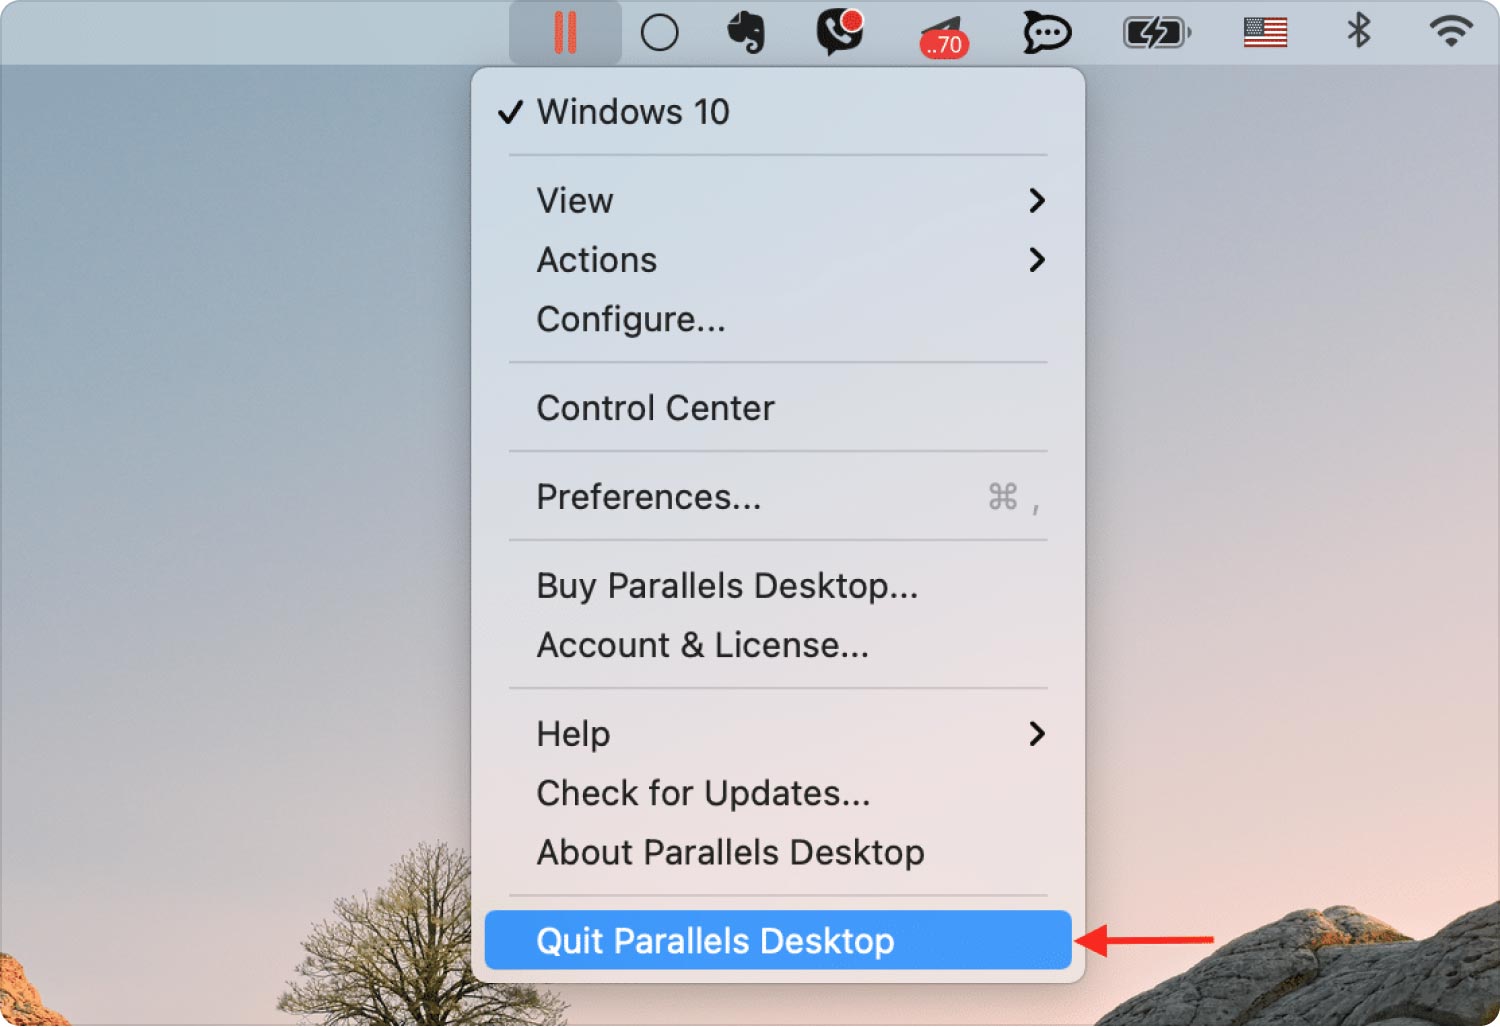 Uninstall Parallels on Mac: The Application Removal